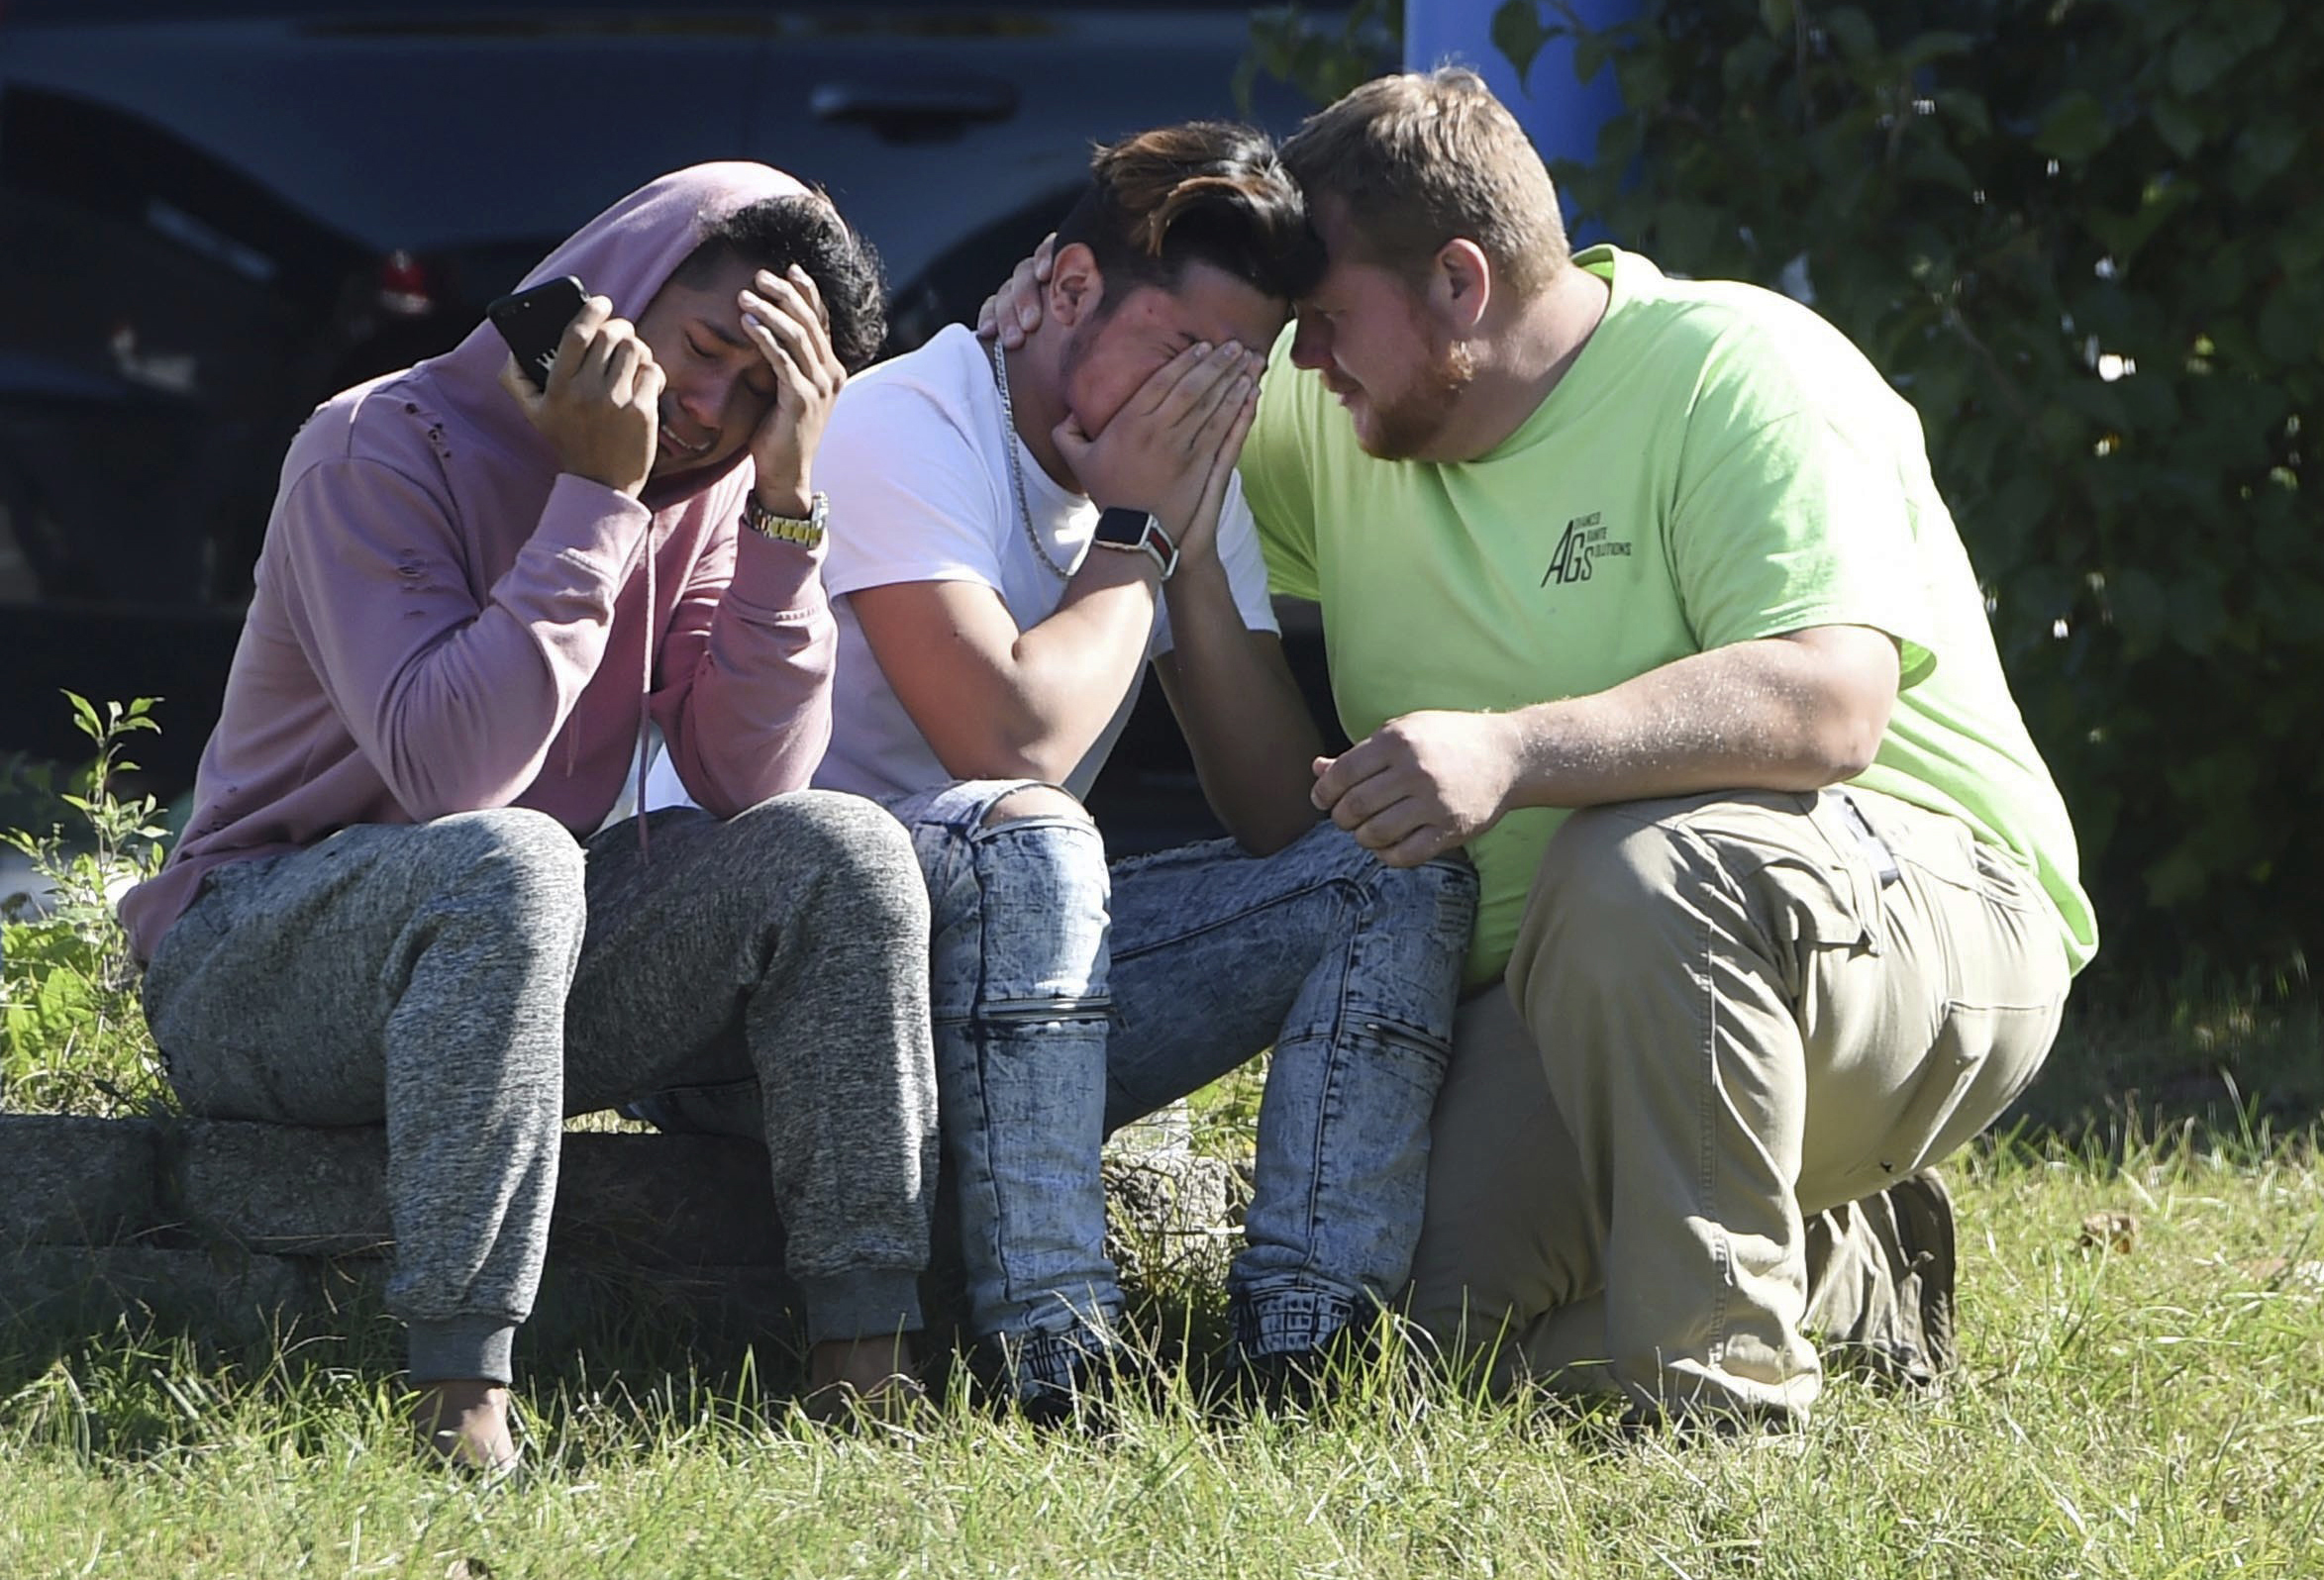 PHOTO: Workers from the Advanced Granite Solutions company console each other as police and Emergency Medical Services respond to a shooting at a business park in the Edgewood area of Harford County, Md., Oct. 18, 2017.